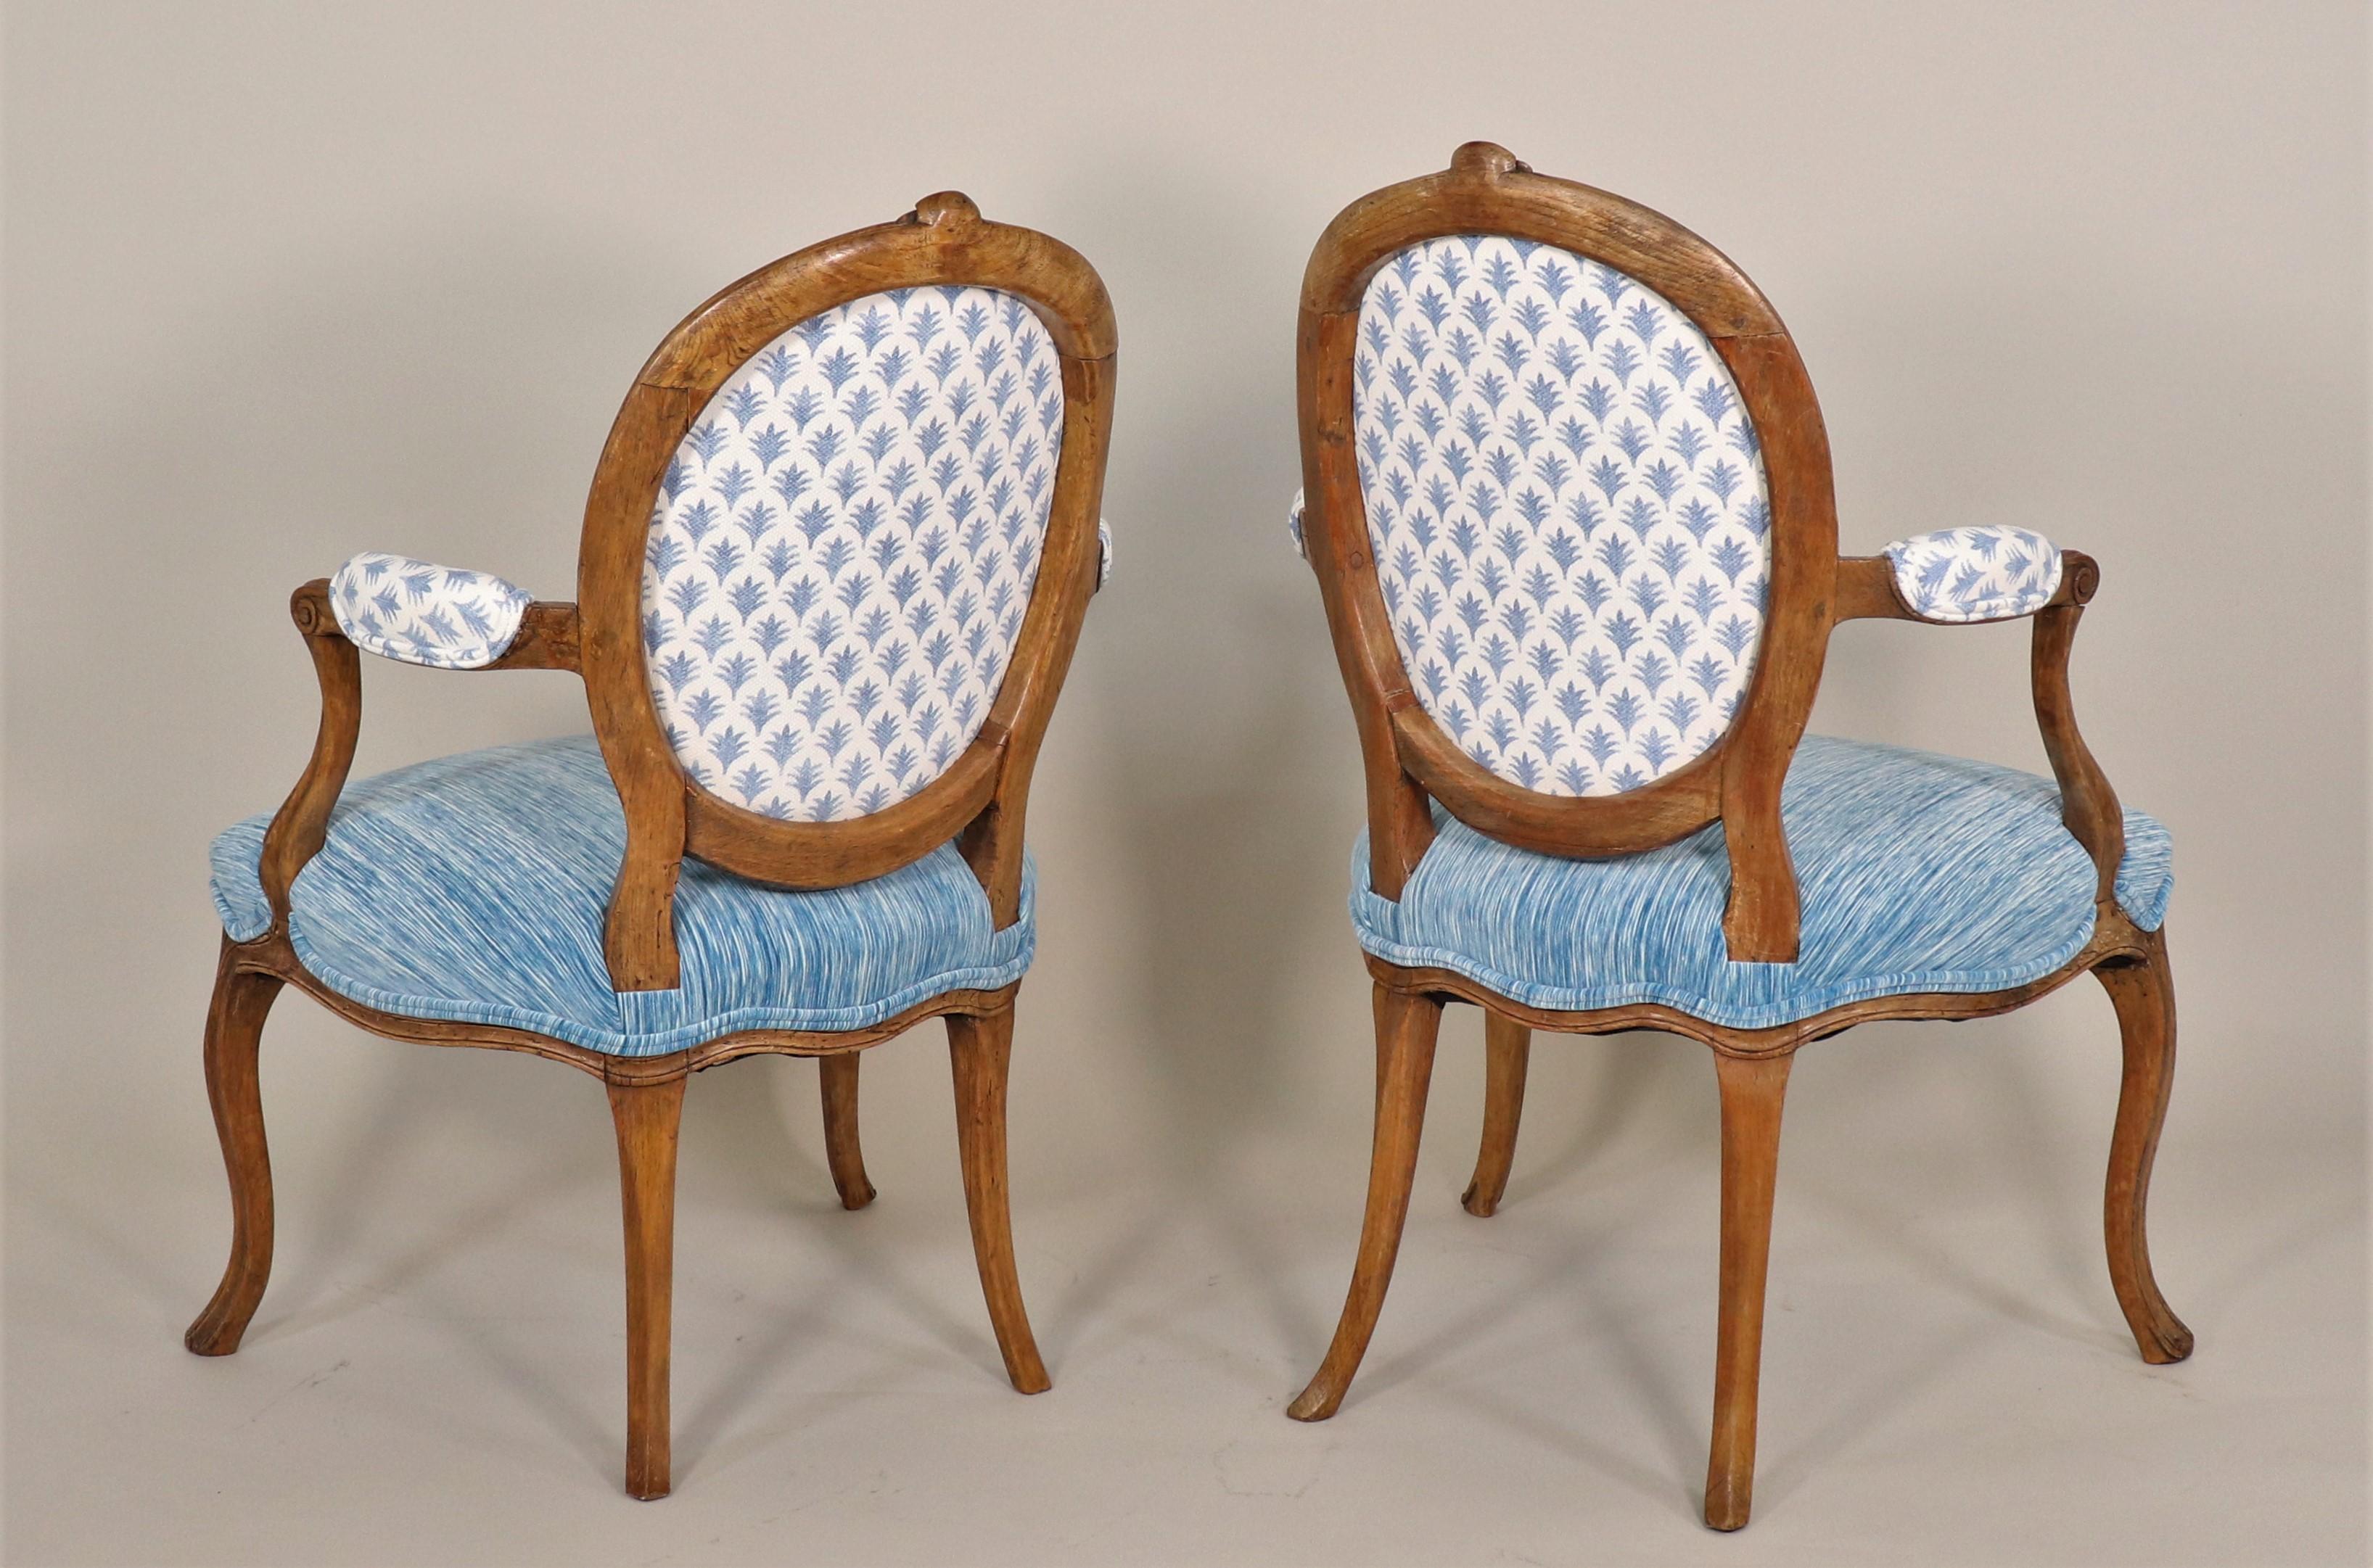 Pair of Mid-19th Century French Régence Style Fauteuils with Modern Fabrics For Sale 4